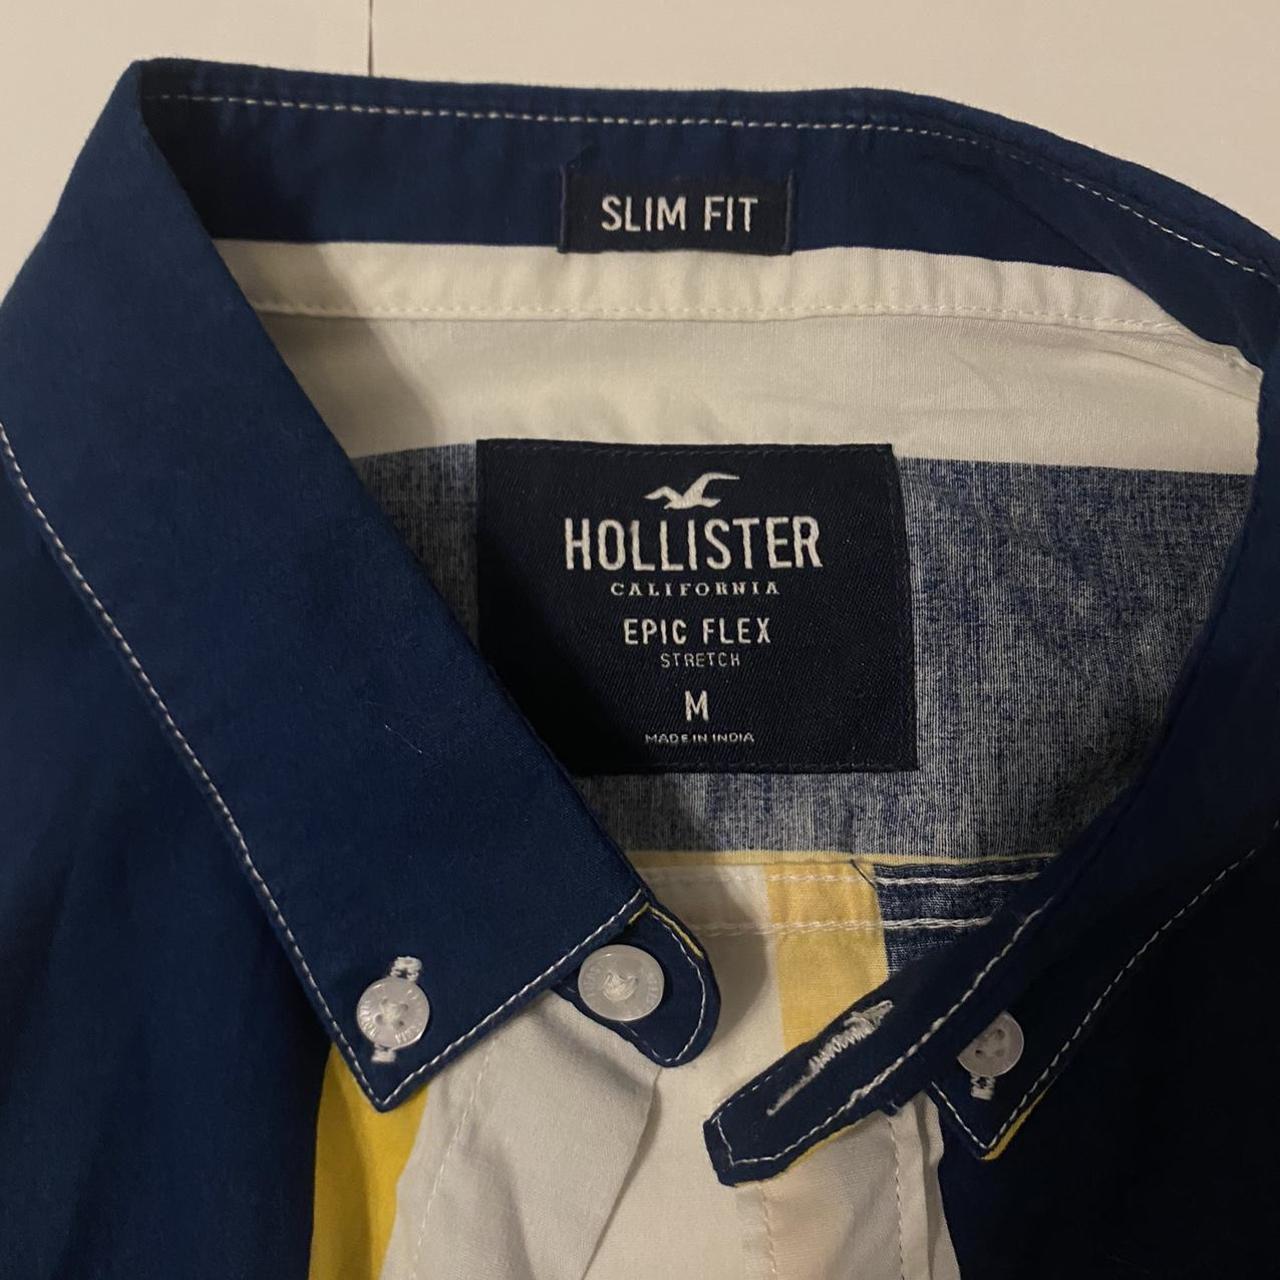 Hollister Blue, Yellow and White Striped Button Up - Depop